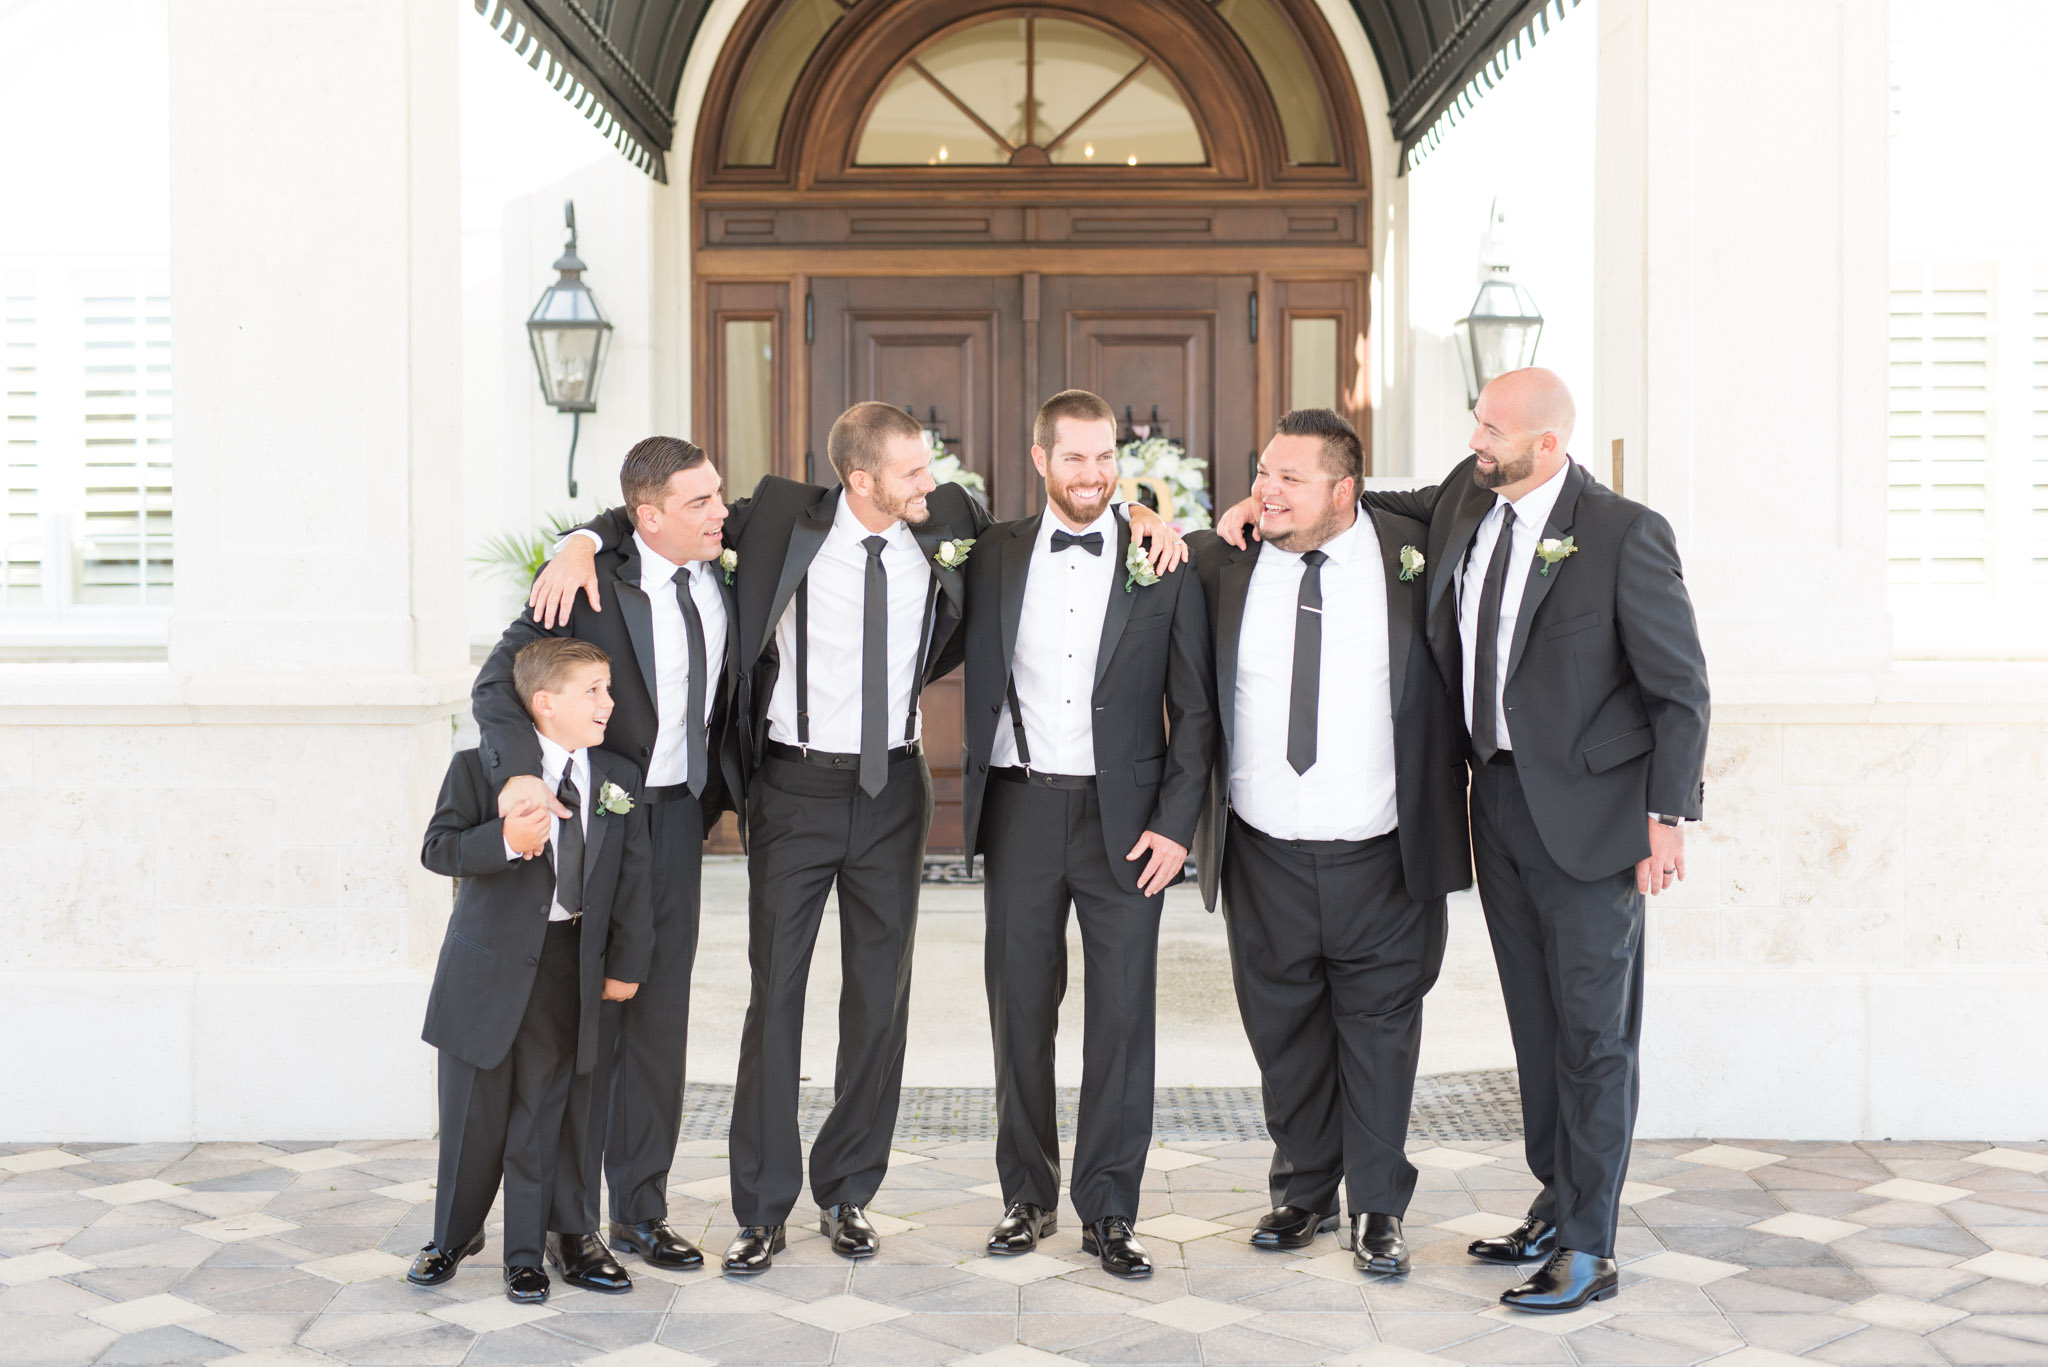 Groom and groomsmen laugh together.